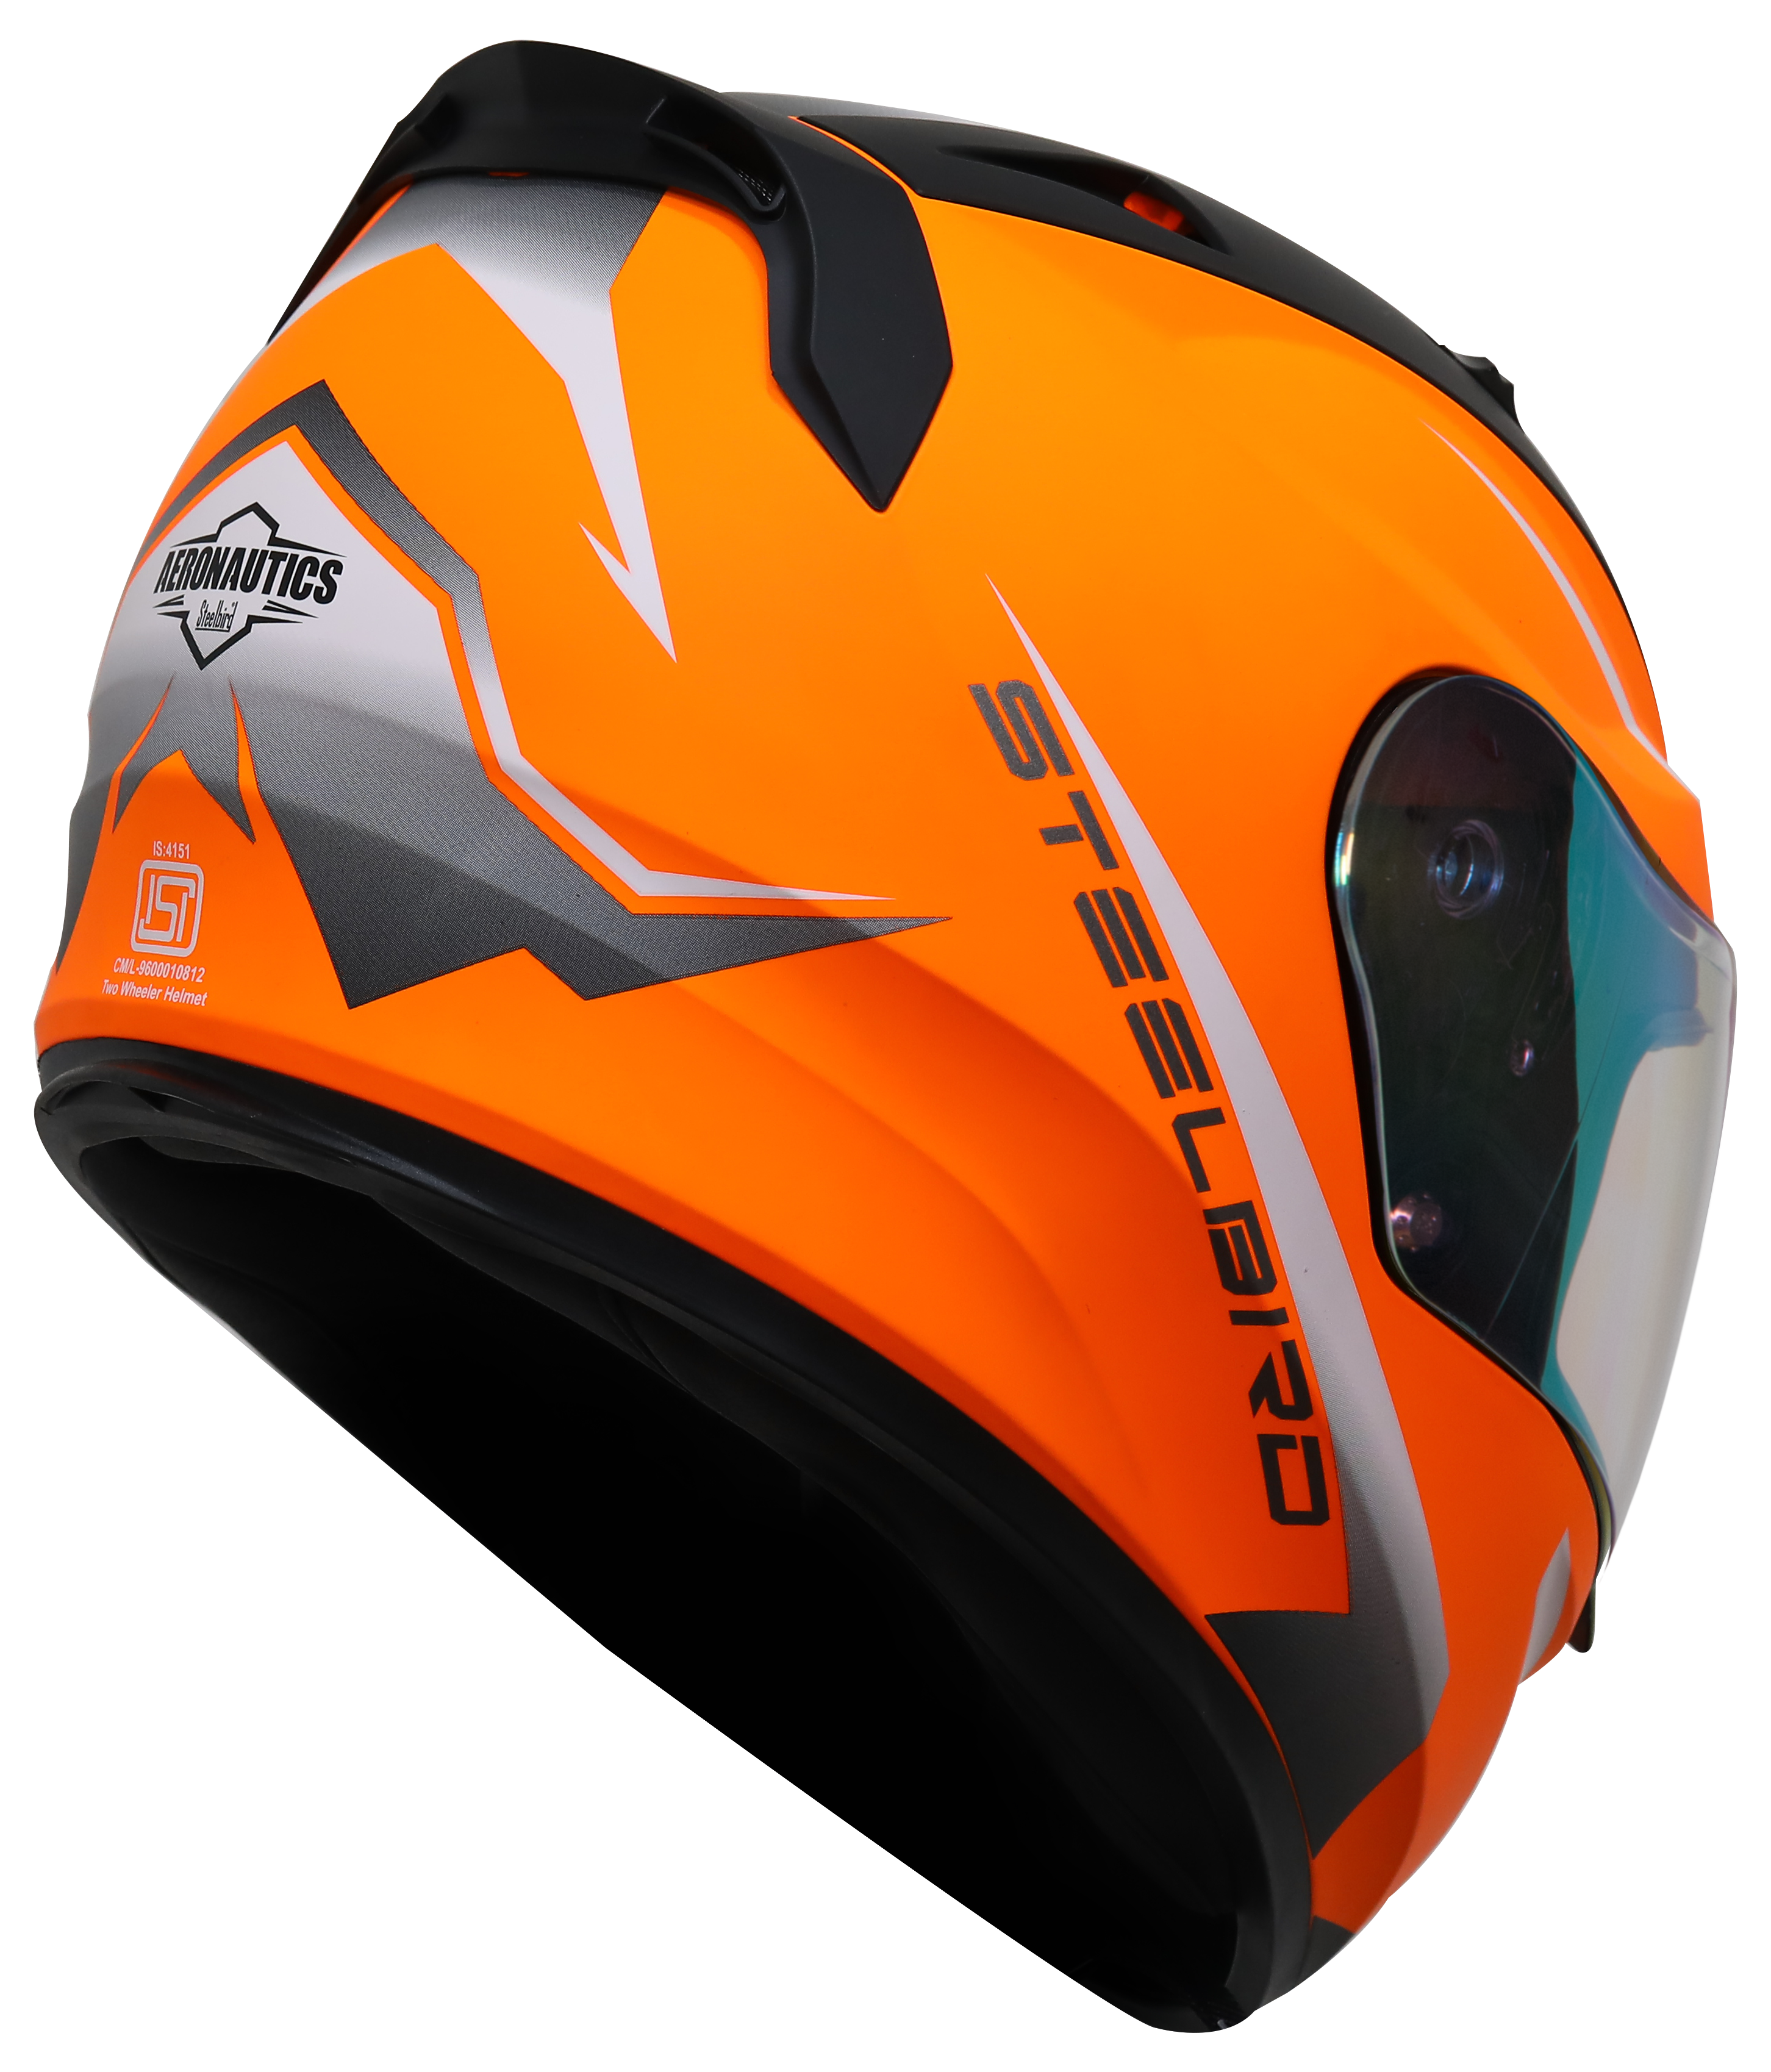 SA-1 WHIF GLOSSY FLUO ORANGE WITH WHITE NIGHT VISION GOLD VISOR (WITH EXTRA FREE CLEAR VISOR)